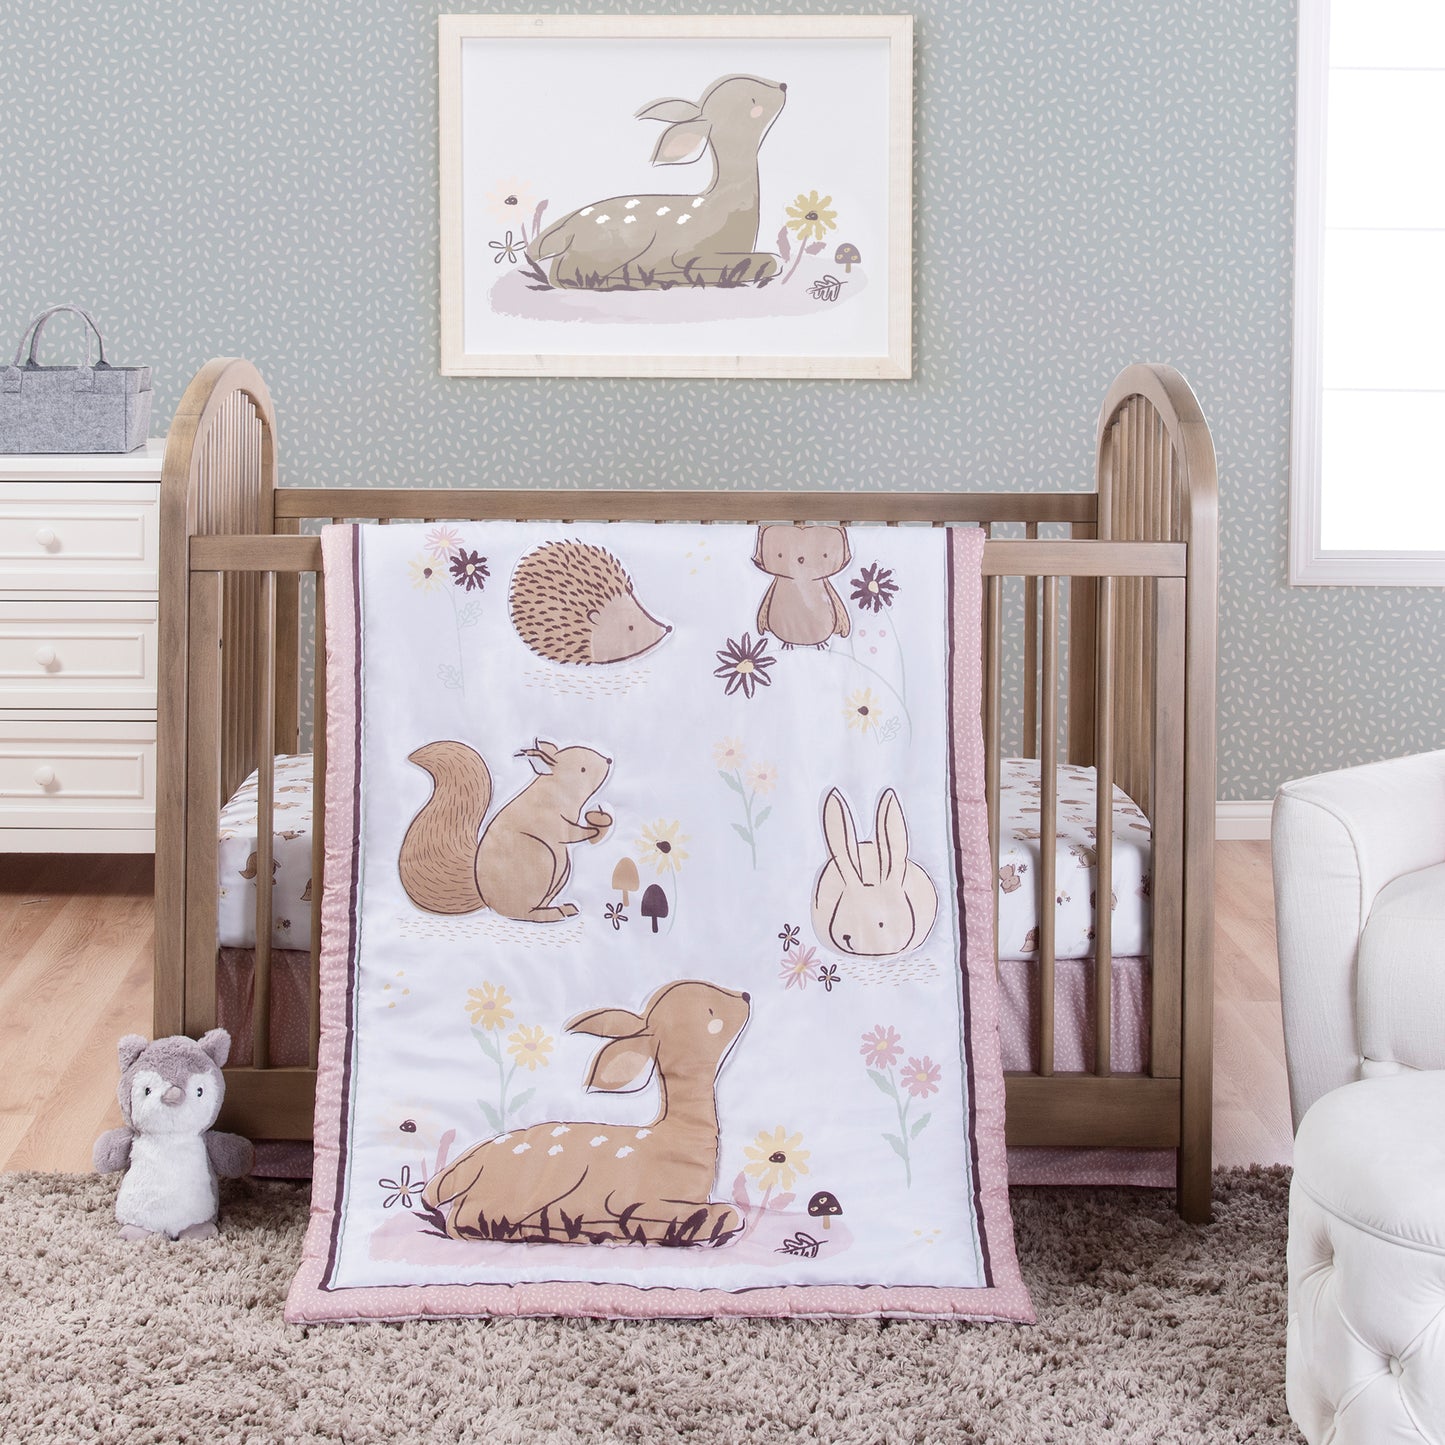 Sweet Autumn Crib Bedding Set in a stylized bedroom